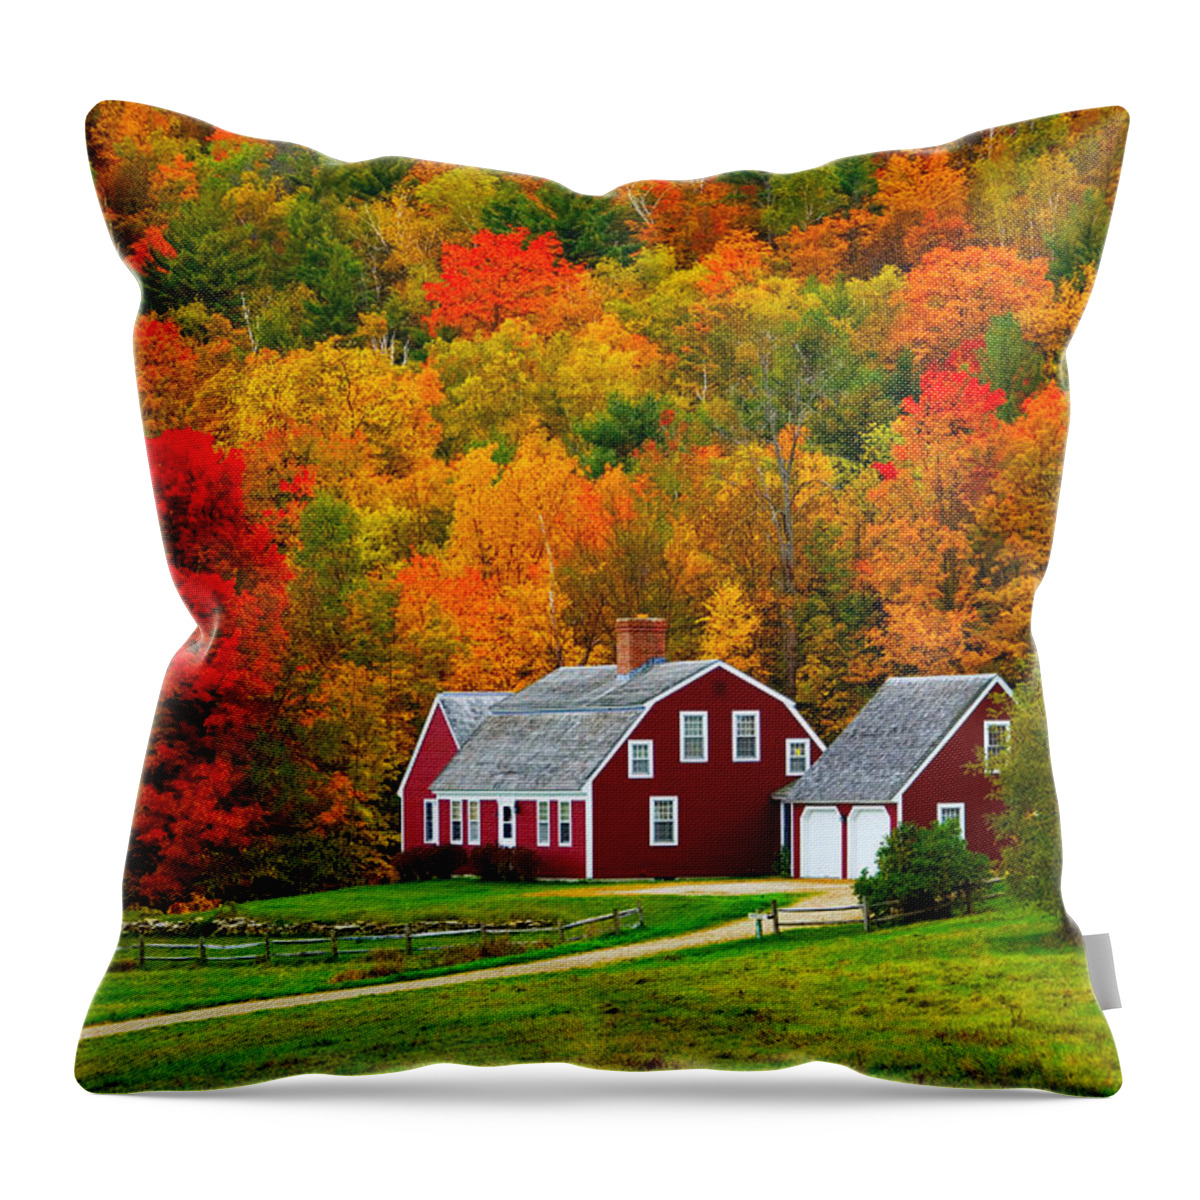 Estock Throw Pillow featuring the digital art Landscape With Farm In Autumn by Pietro Canali